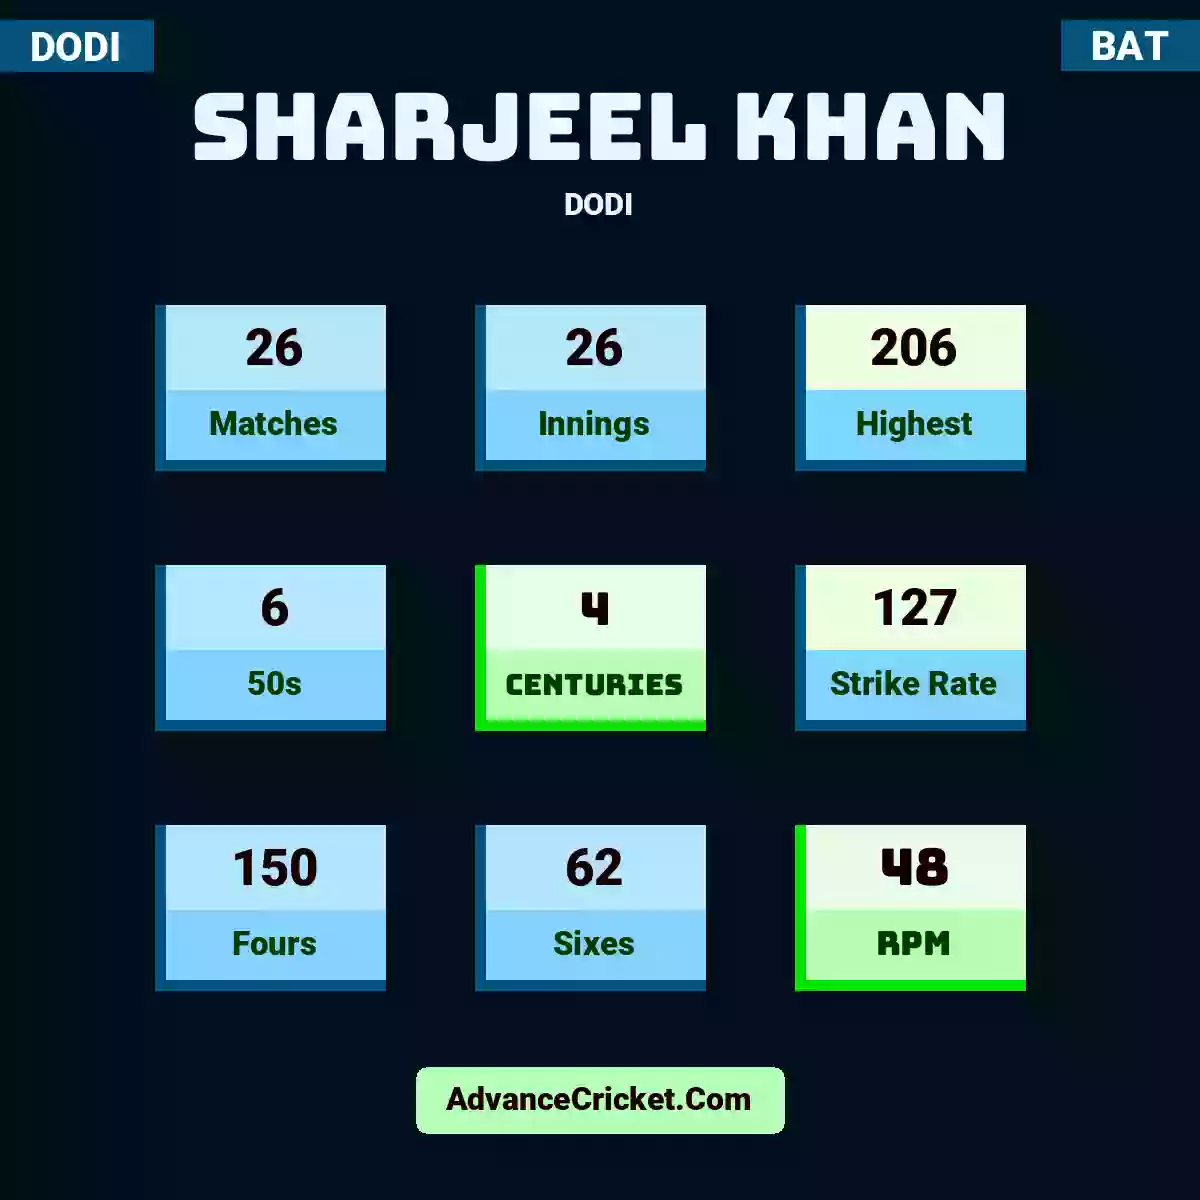 Sharjeel Khan DODI , Sharjeel Khan played 26 matches, scored 206 runs as highest, 6 half-centuries, and 4 centuries, with a strike rate of 127. S.Khan hit 150 fours and 62 sixes, with an RPM of 48.